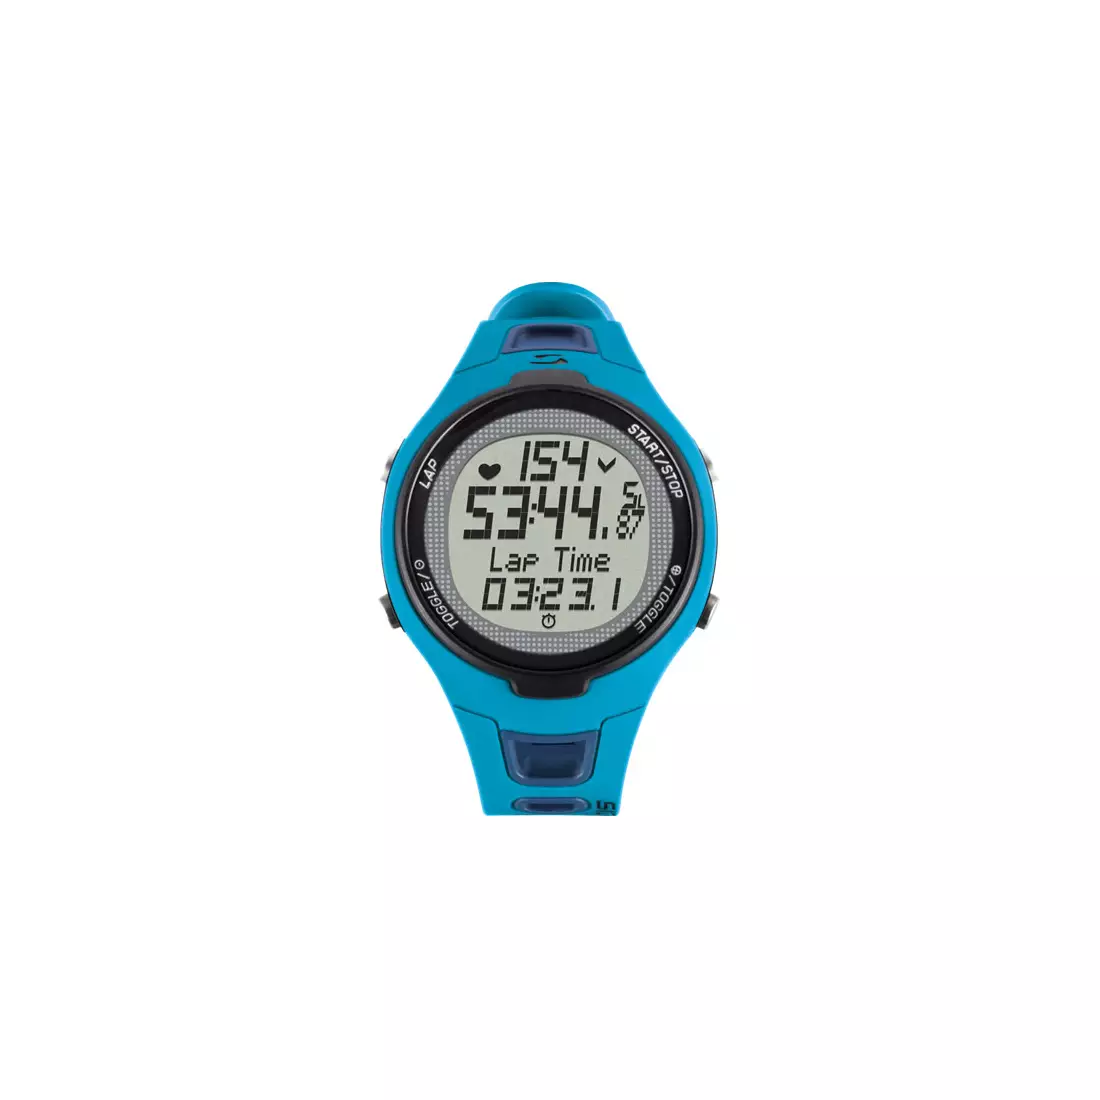 SIGMA 15.11 heart rate monitor with a band, blue